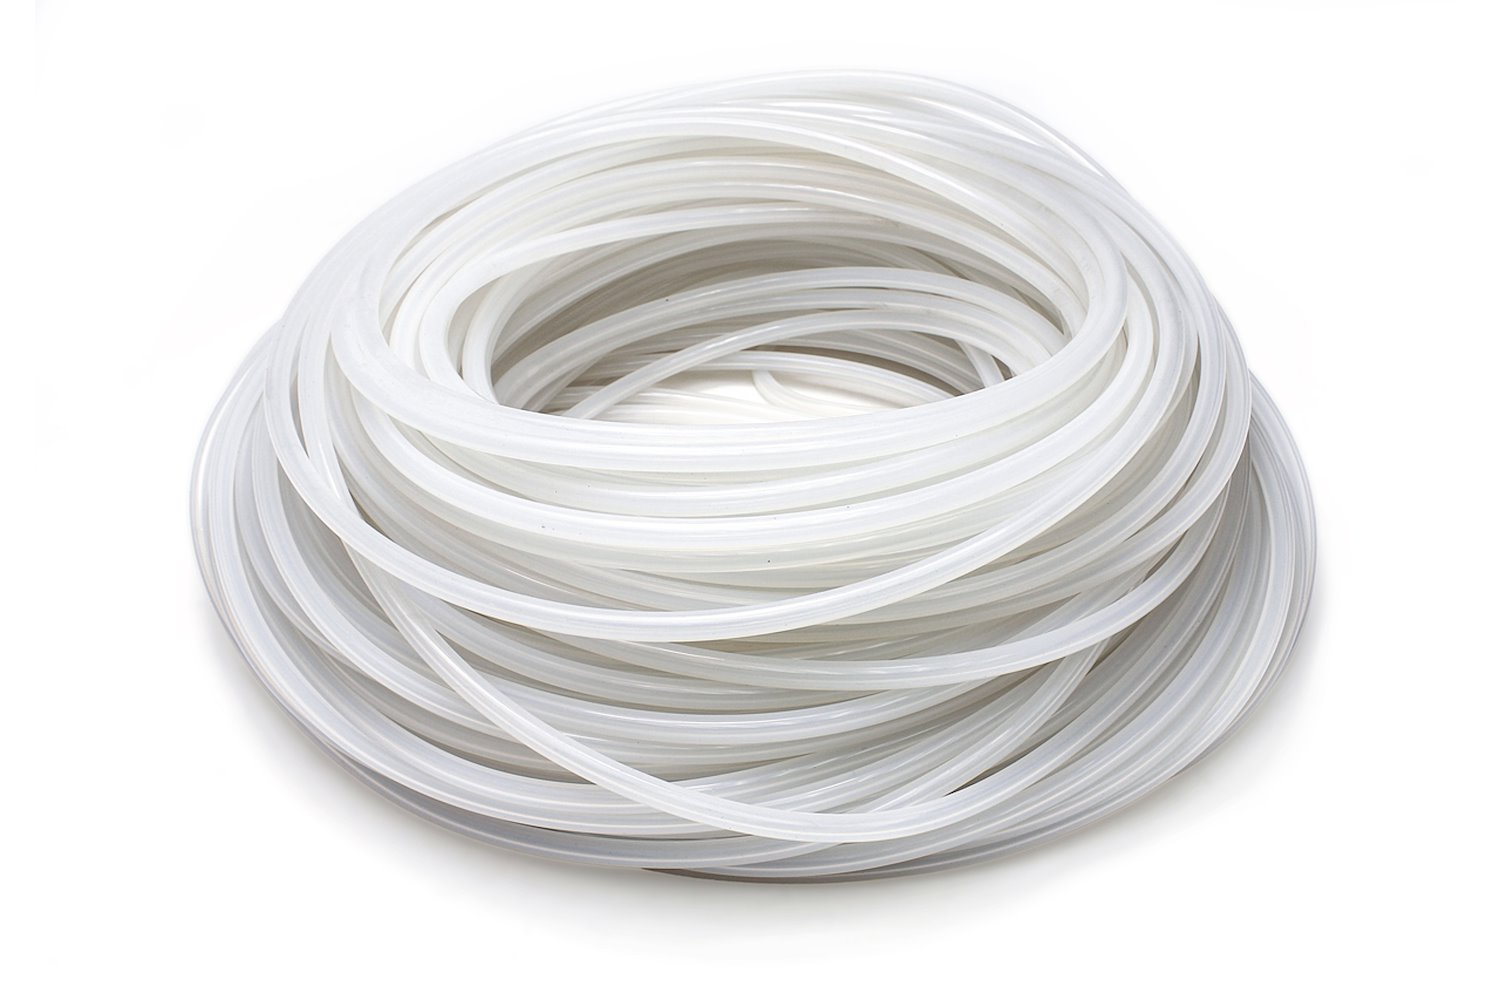 HTSVH4-CLEARx100 High-Temperature Silicone Vacuum Hose Tubing, 5/32 in. ID, 100 ft. Roll, Clear